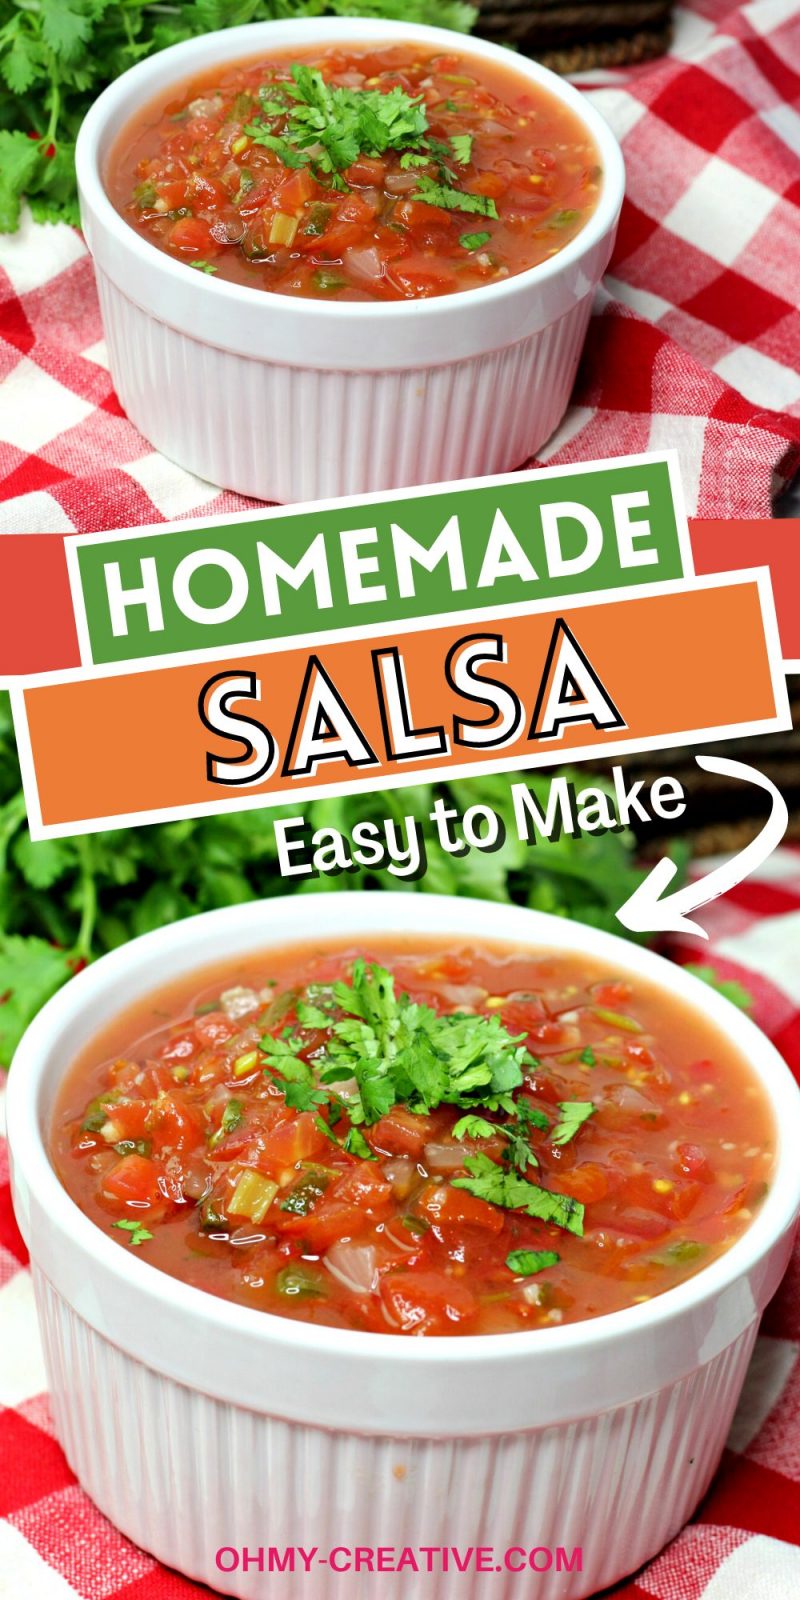 This easy homemade salsa recipe is served in a white bowl and is ready to serve with chips!